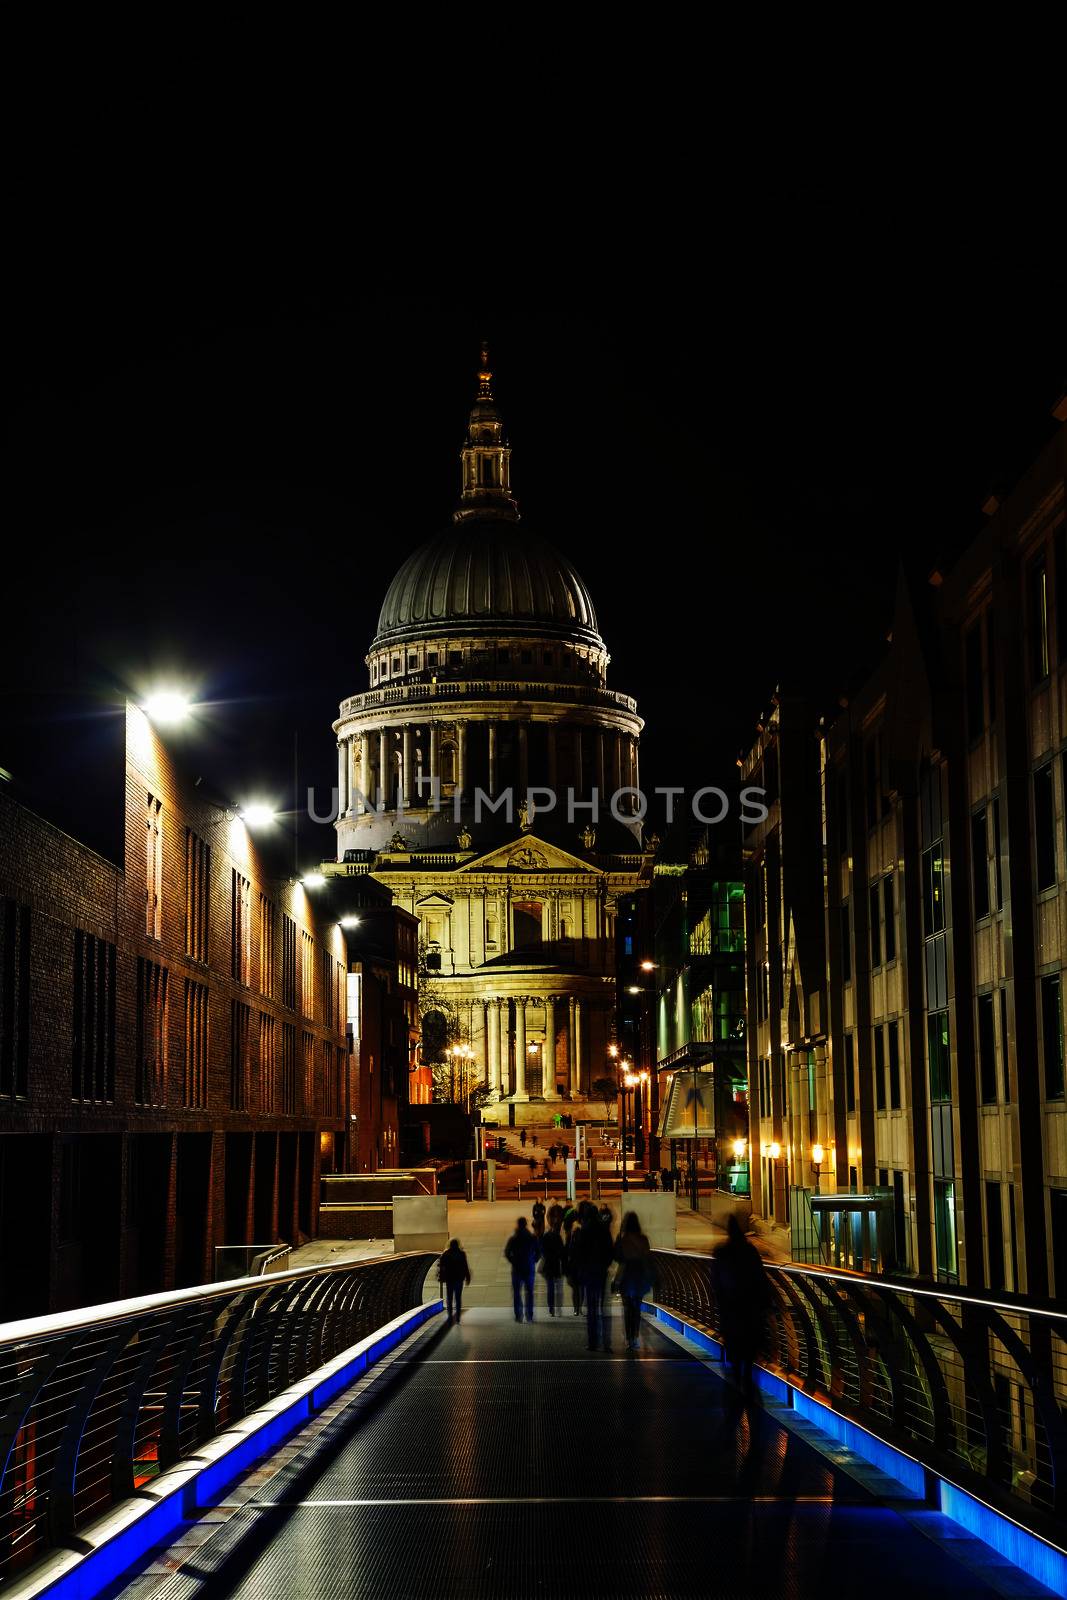 Saint Paul's cathedral in London, United Kingdom in the evening